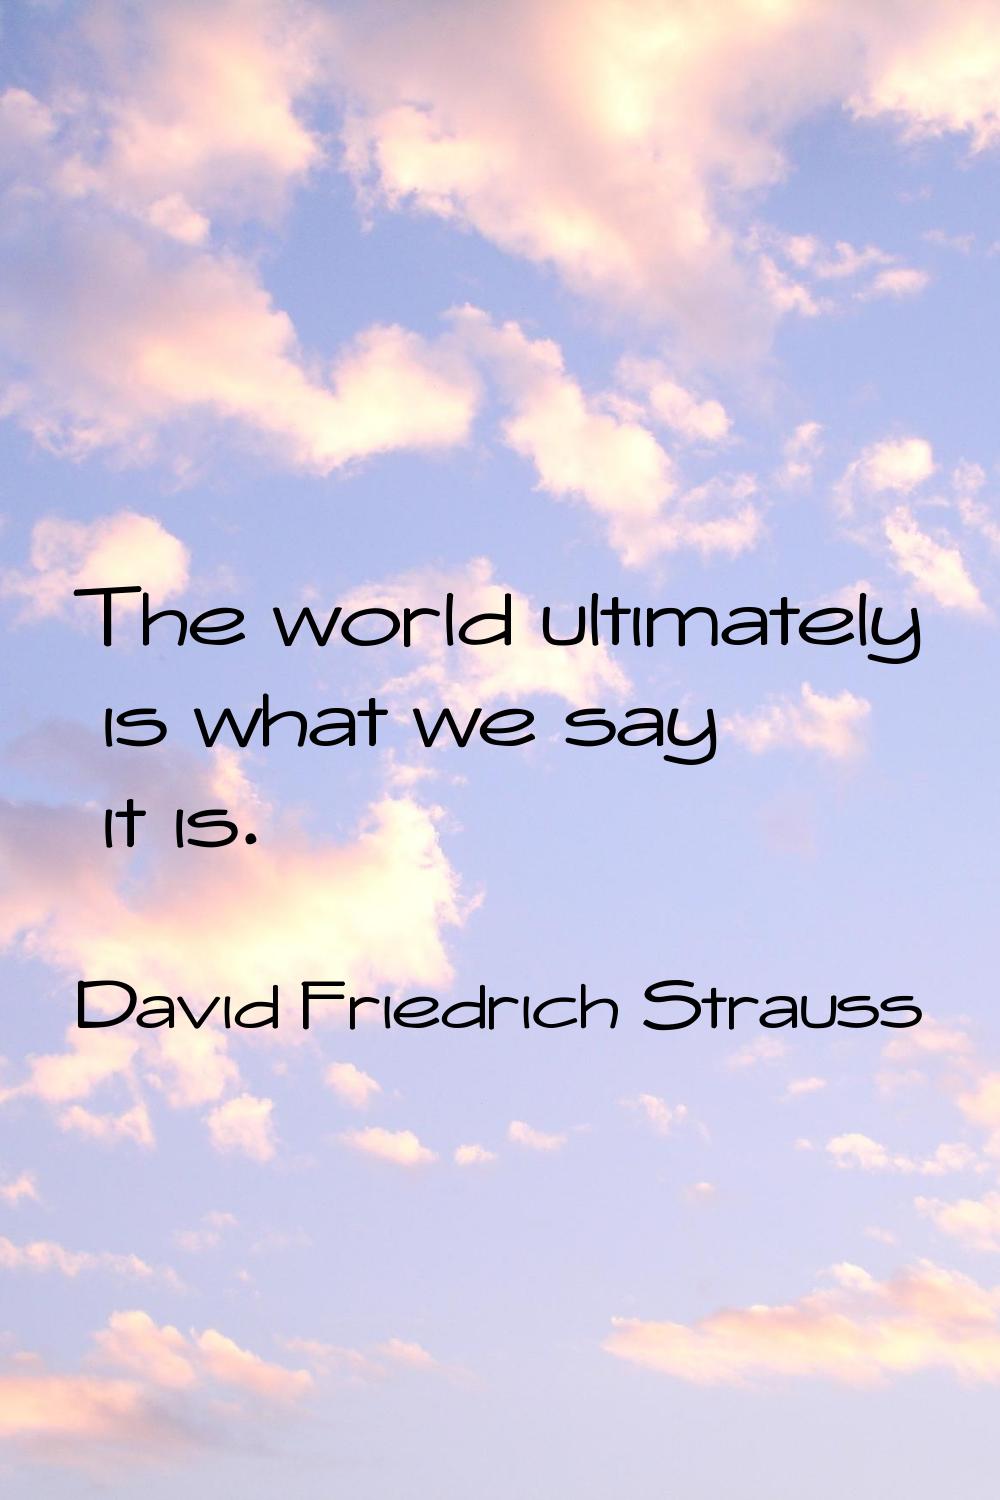 The world ultimately is what we say it is.